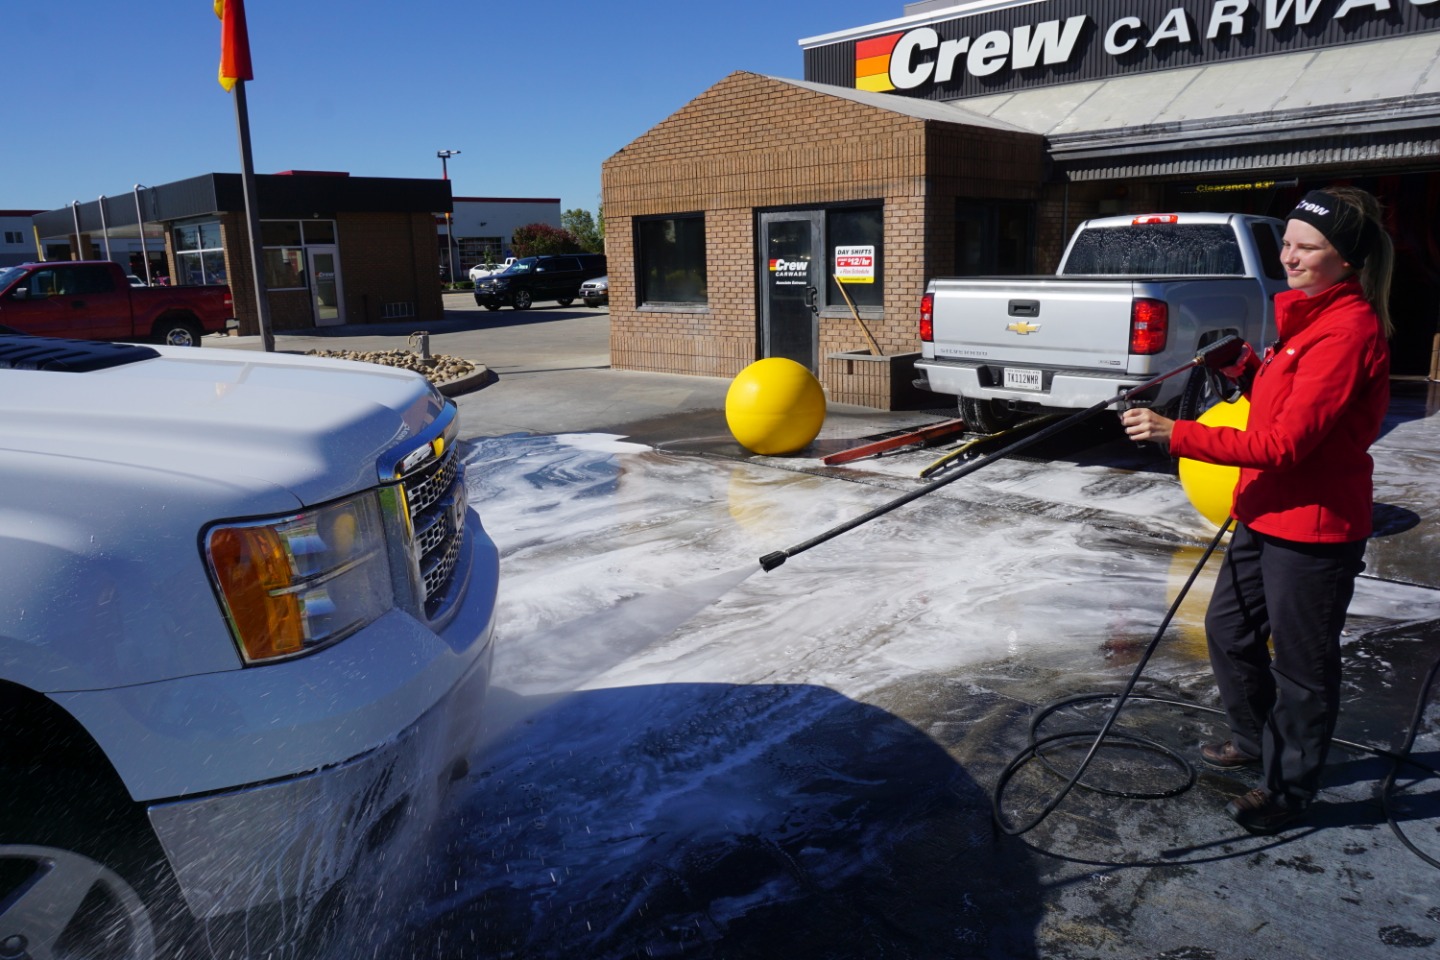 Crew Carwash 2674 E. Main Street Plainfield, IN Car Washes - MapQuest.